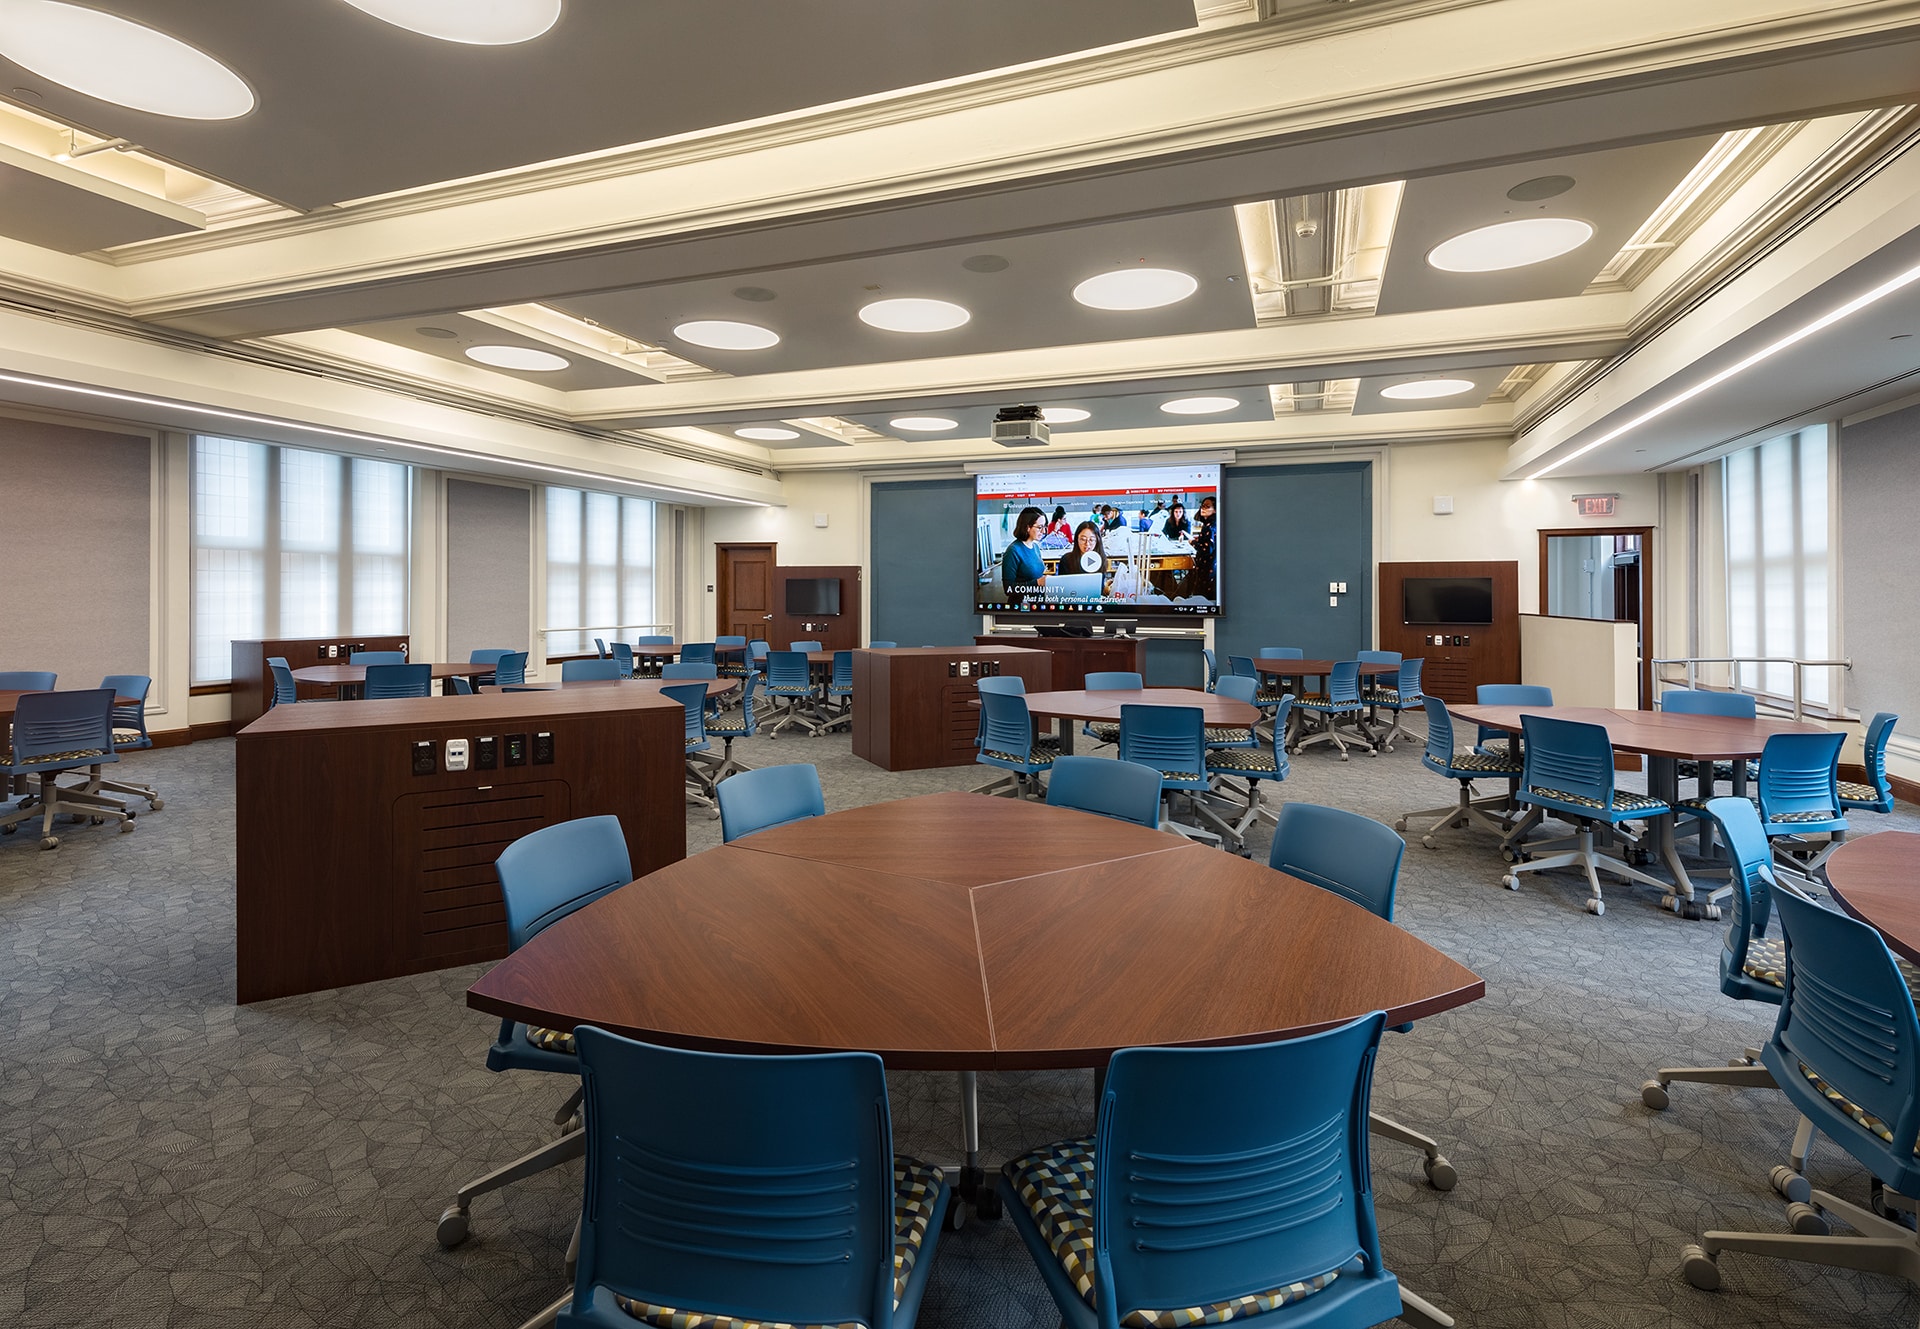 interior of washington university january hall classroom designed by trivers architectural firm